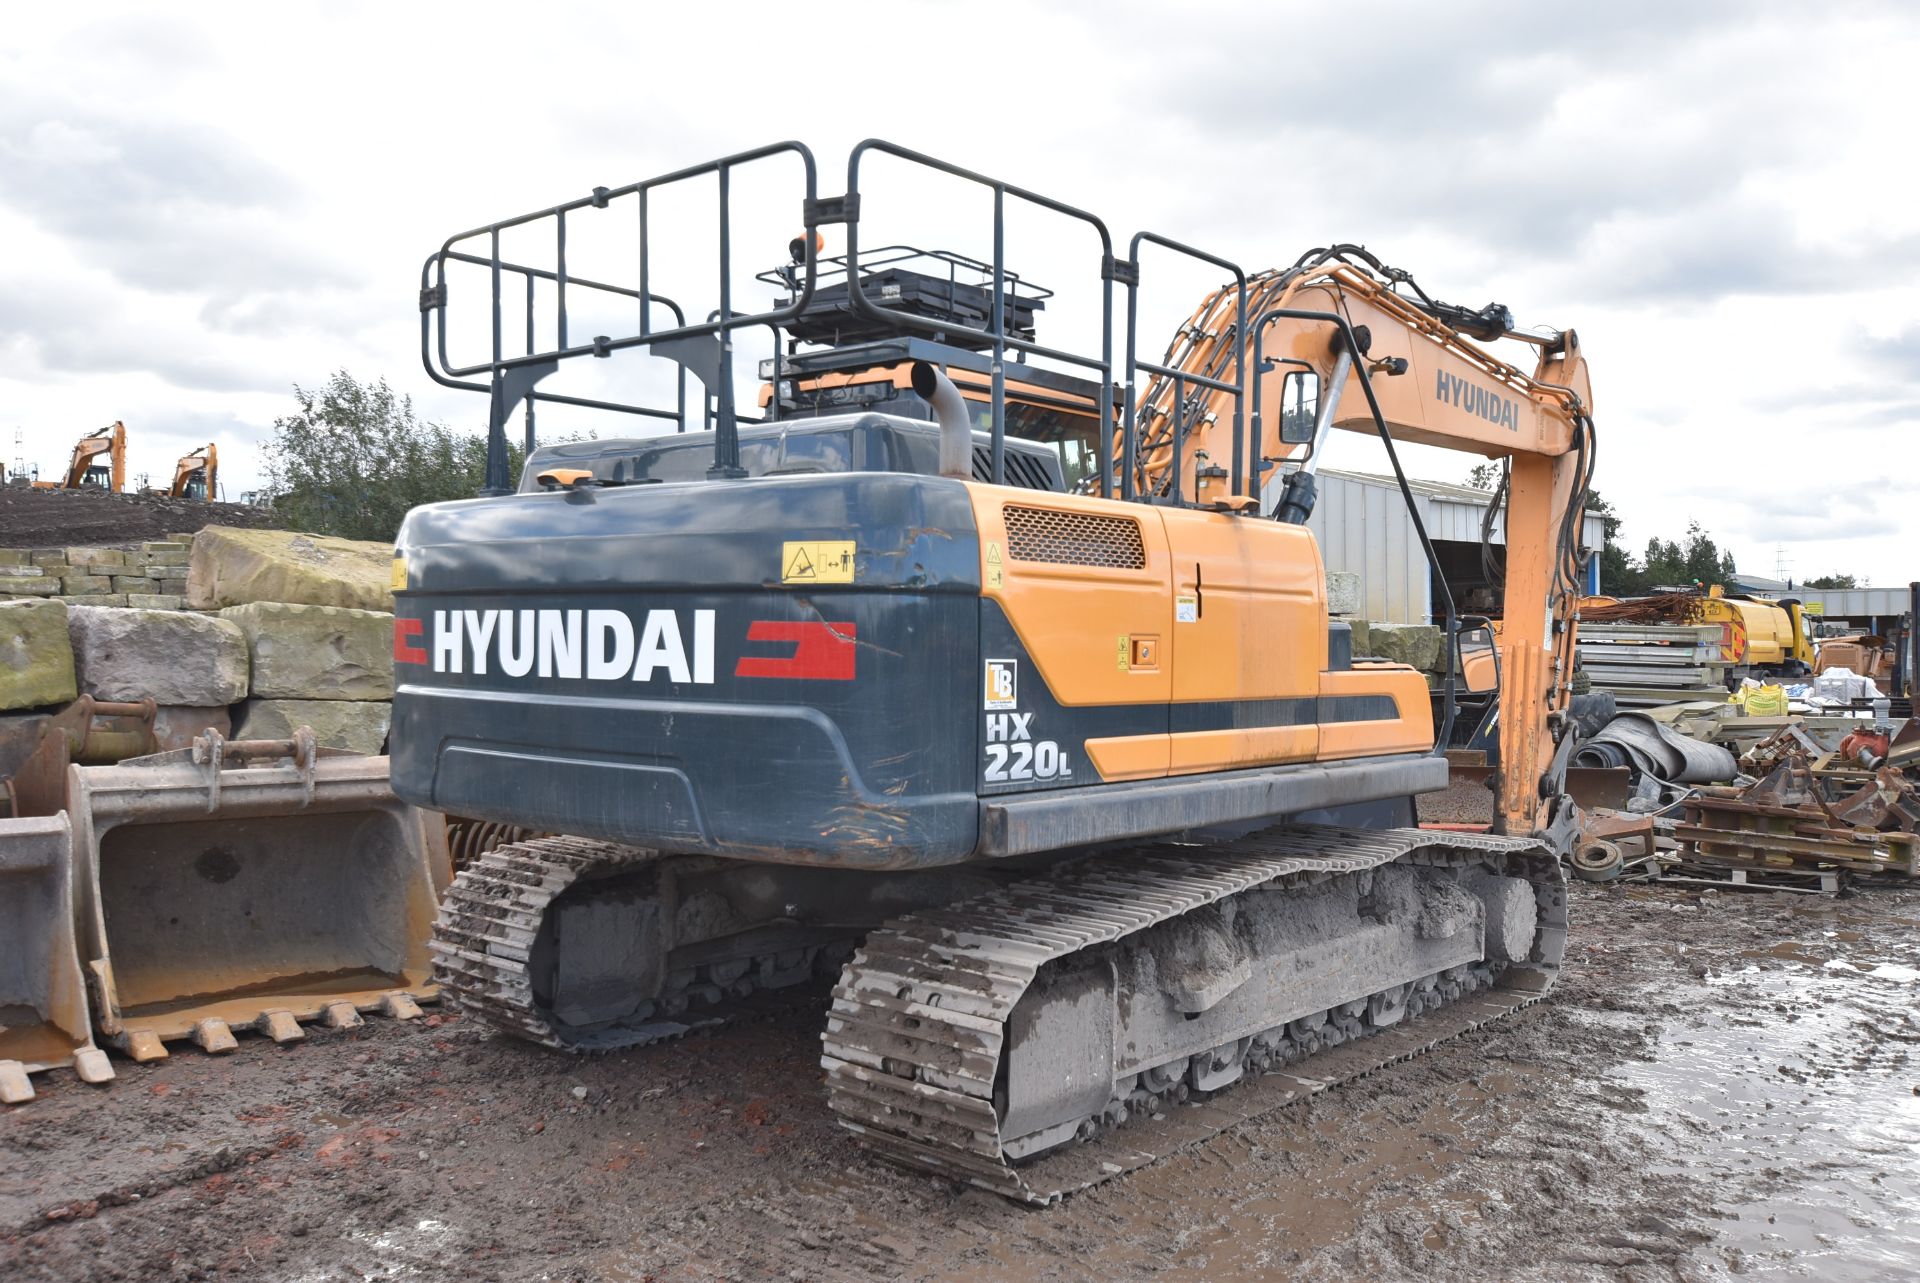 Hyundai HX220L TRACKED EXCAVATOR, serial no. 993, year of manufacture 2018, indicated hours 1885 (at - Image 3 of 10